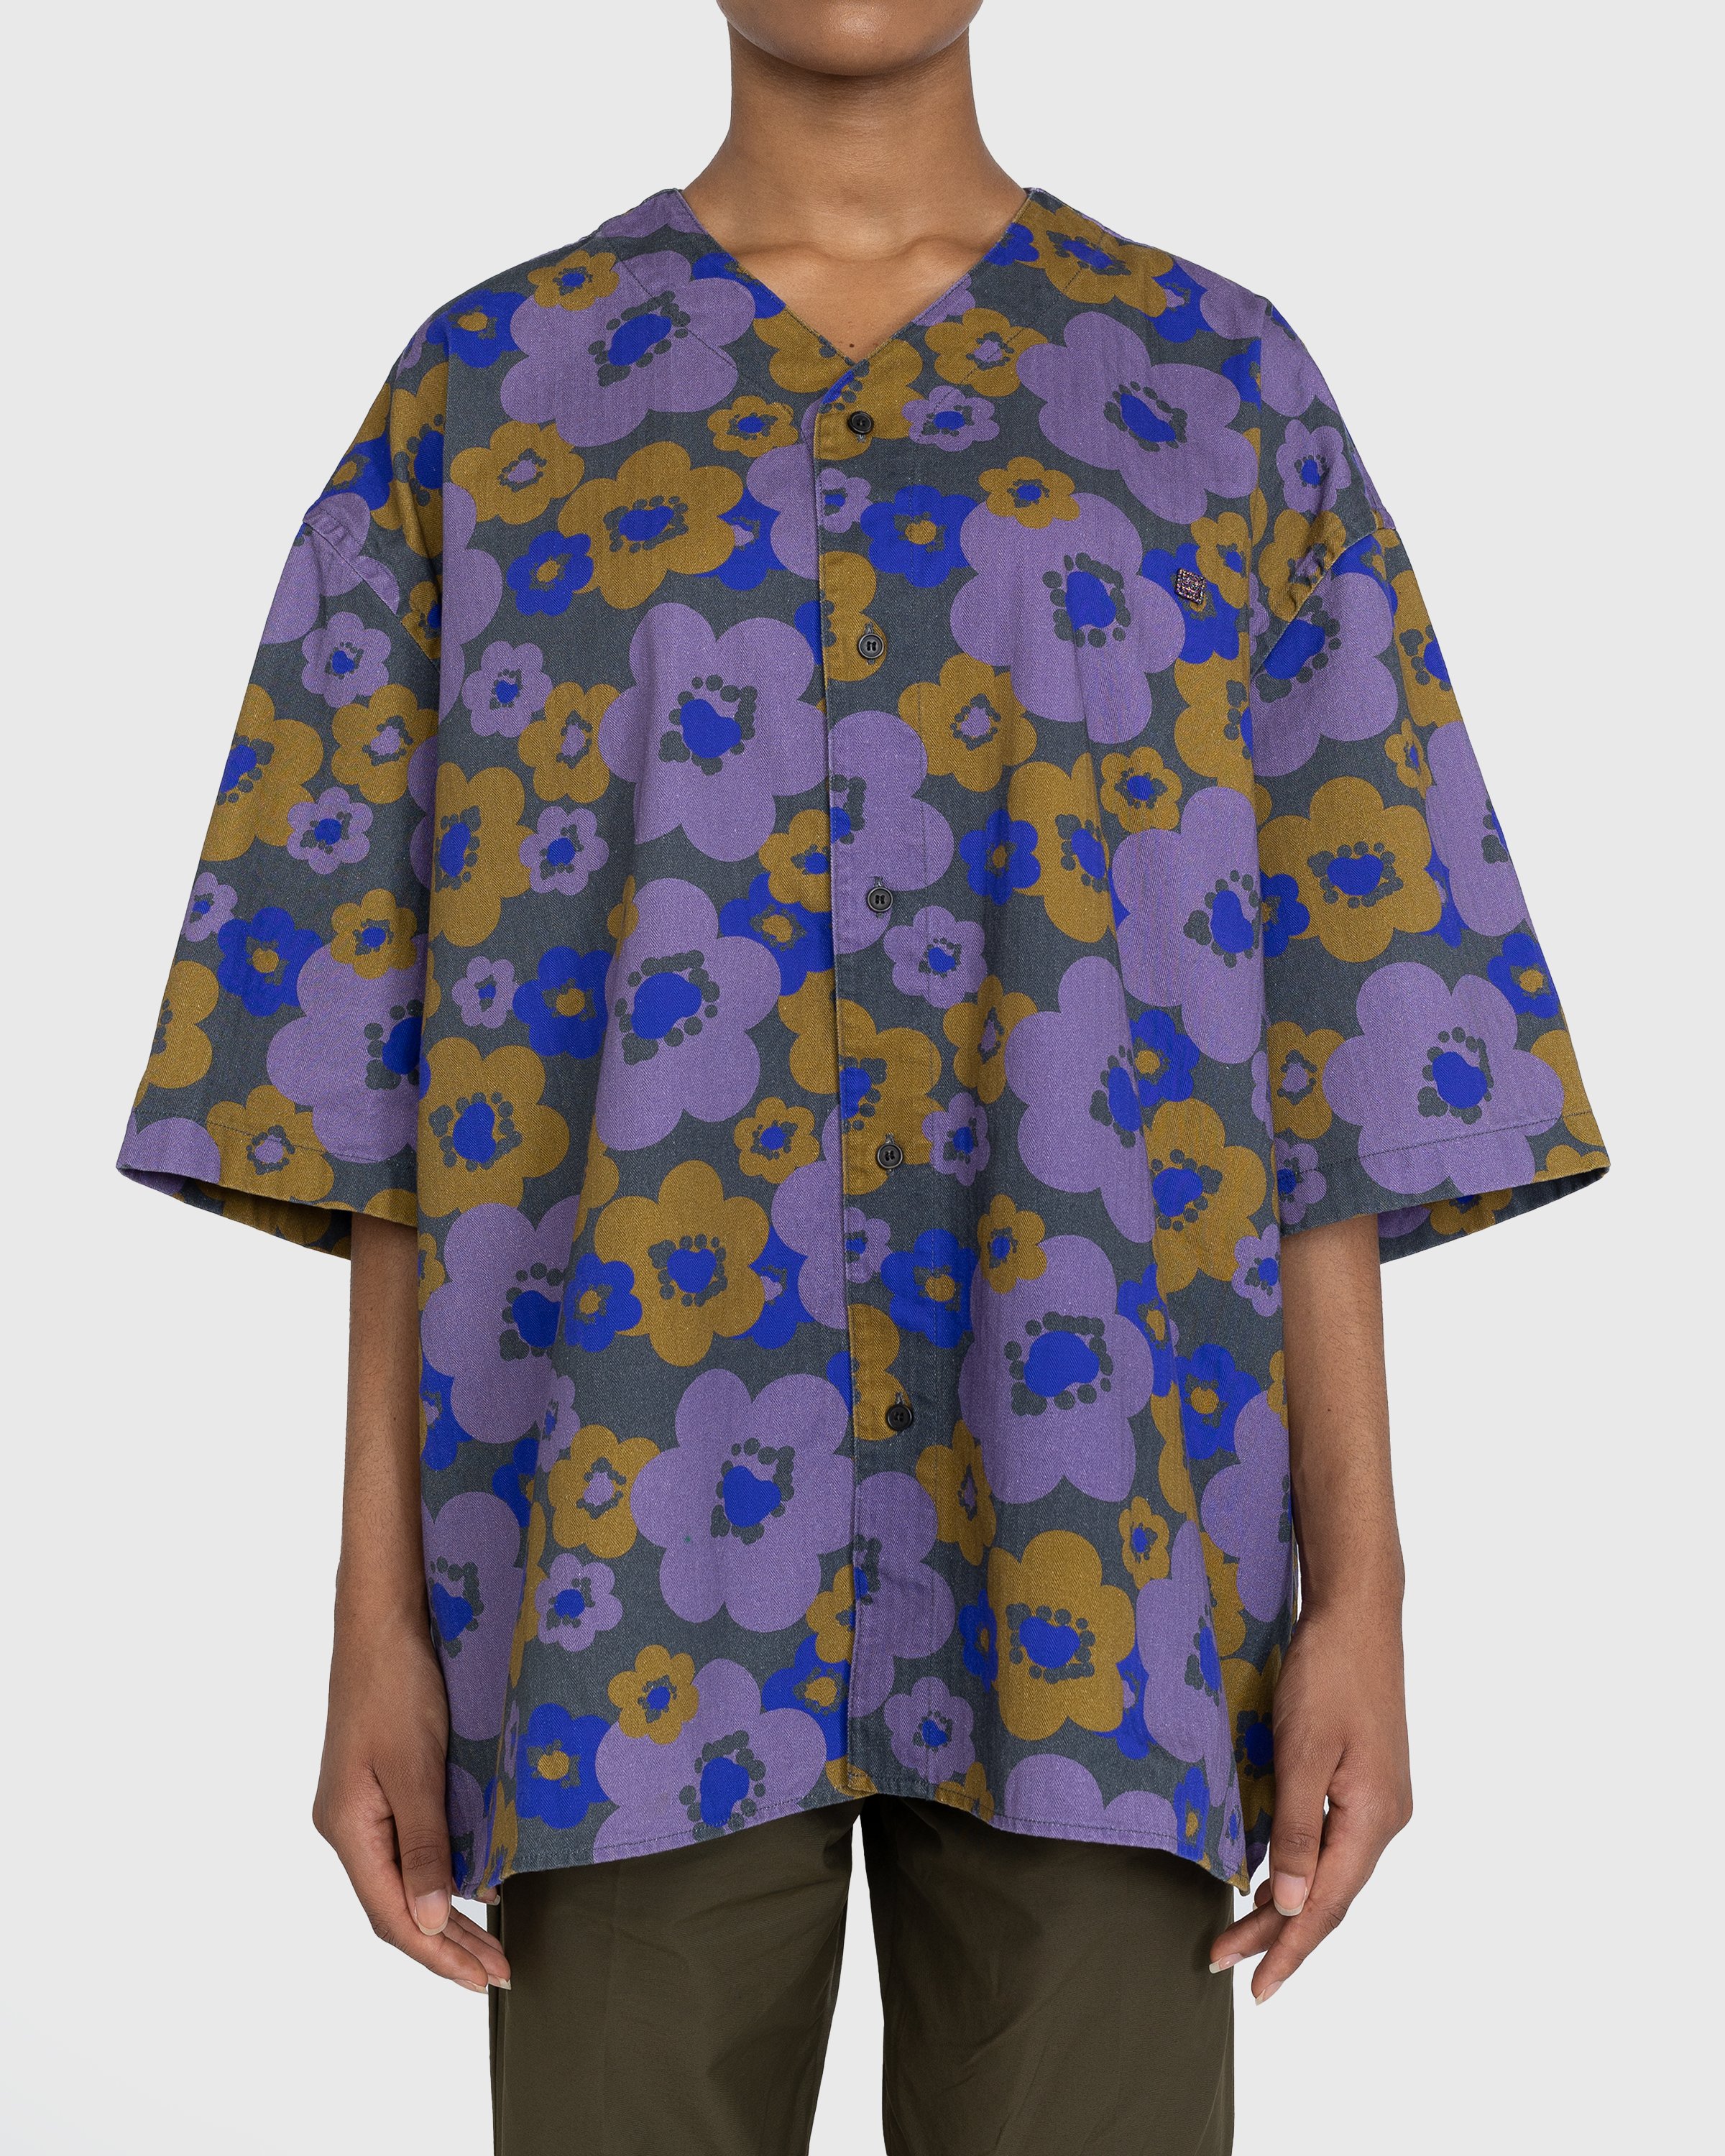 Acne Studios - Floral Short-Sleeve Button-Up Purple/Brown - Clothing - Multi - Image 2